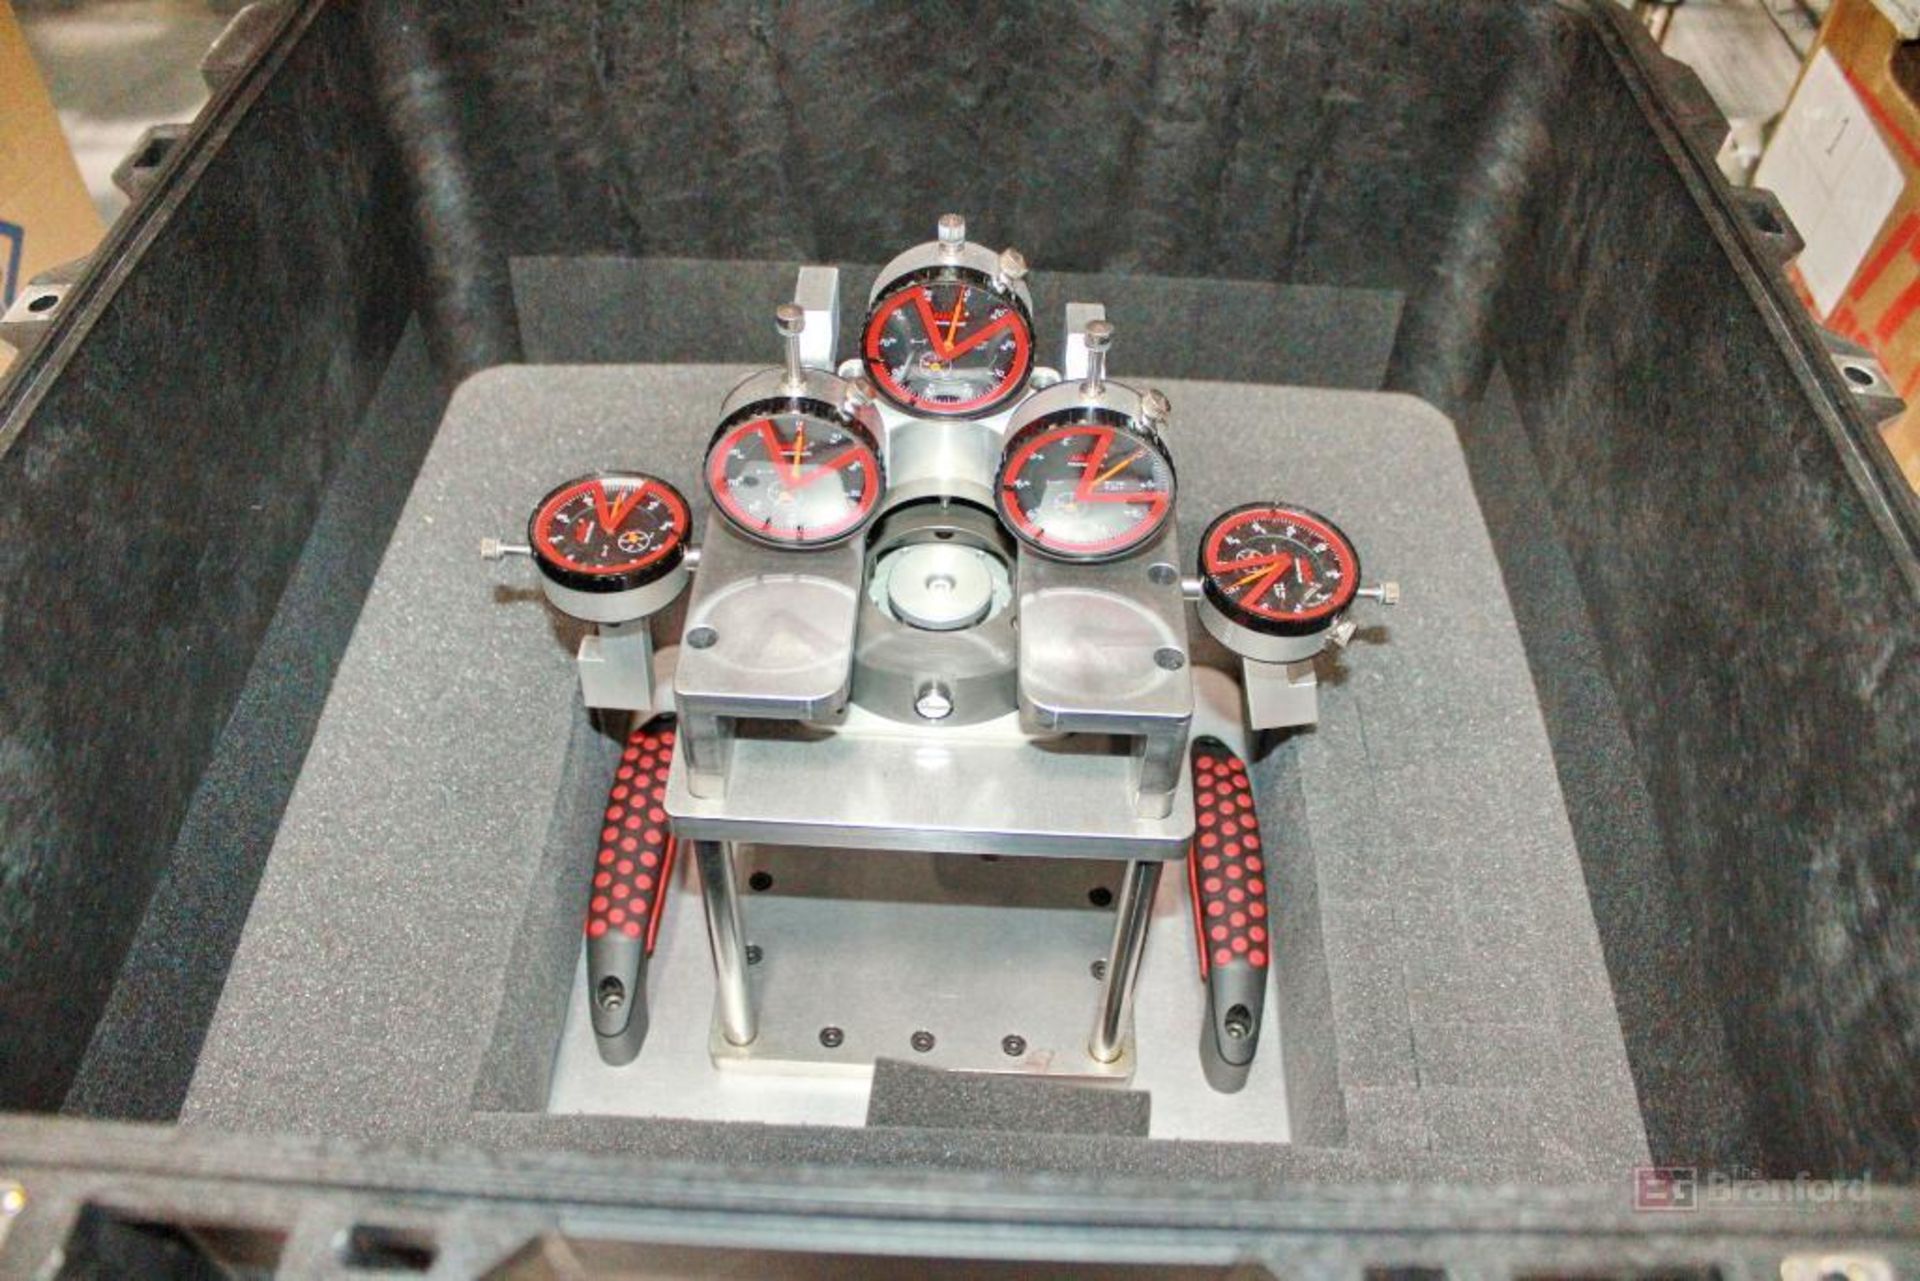 MHC Industrial Supply Laser Alignment Assembly Check Fixture w/ Pelican Case